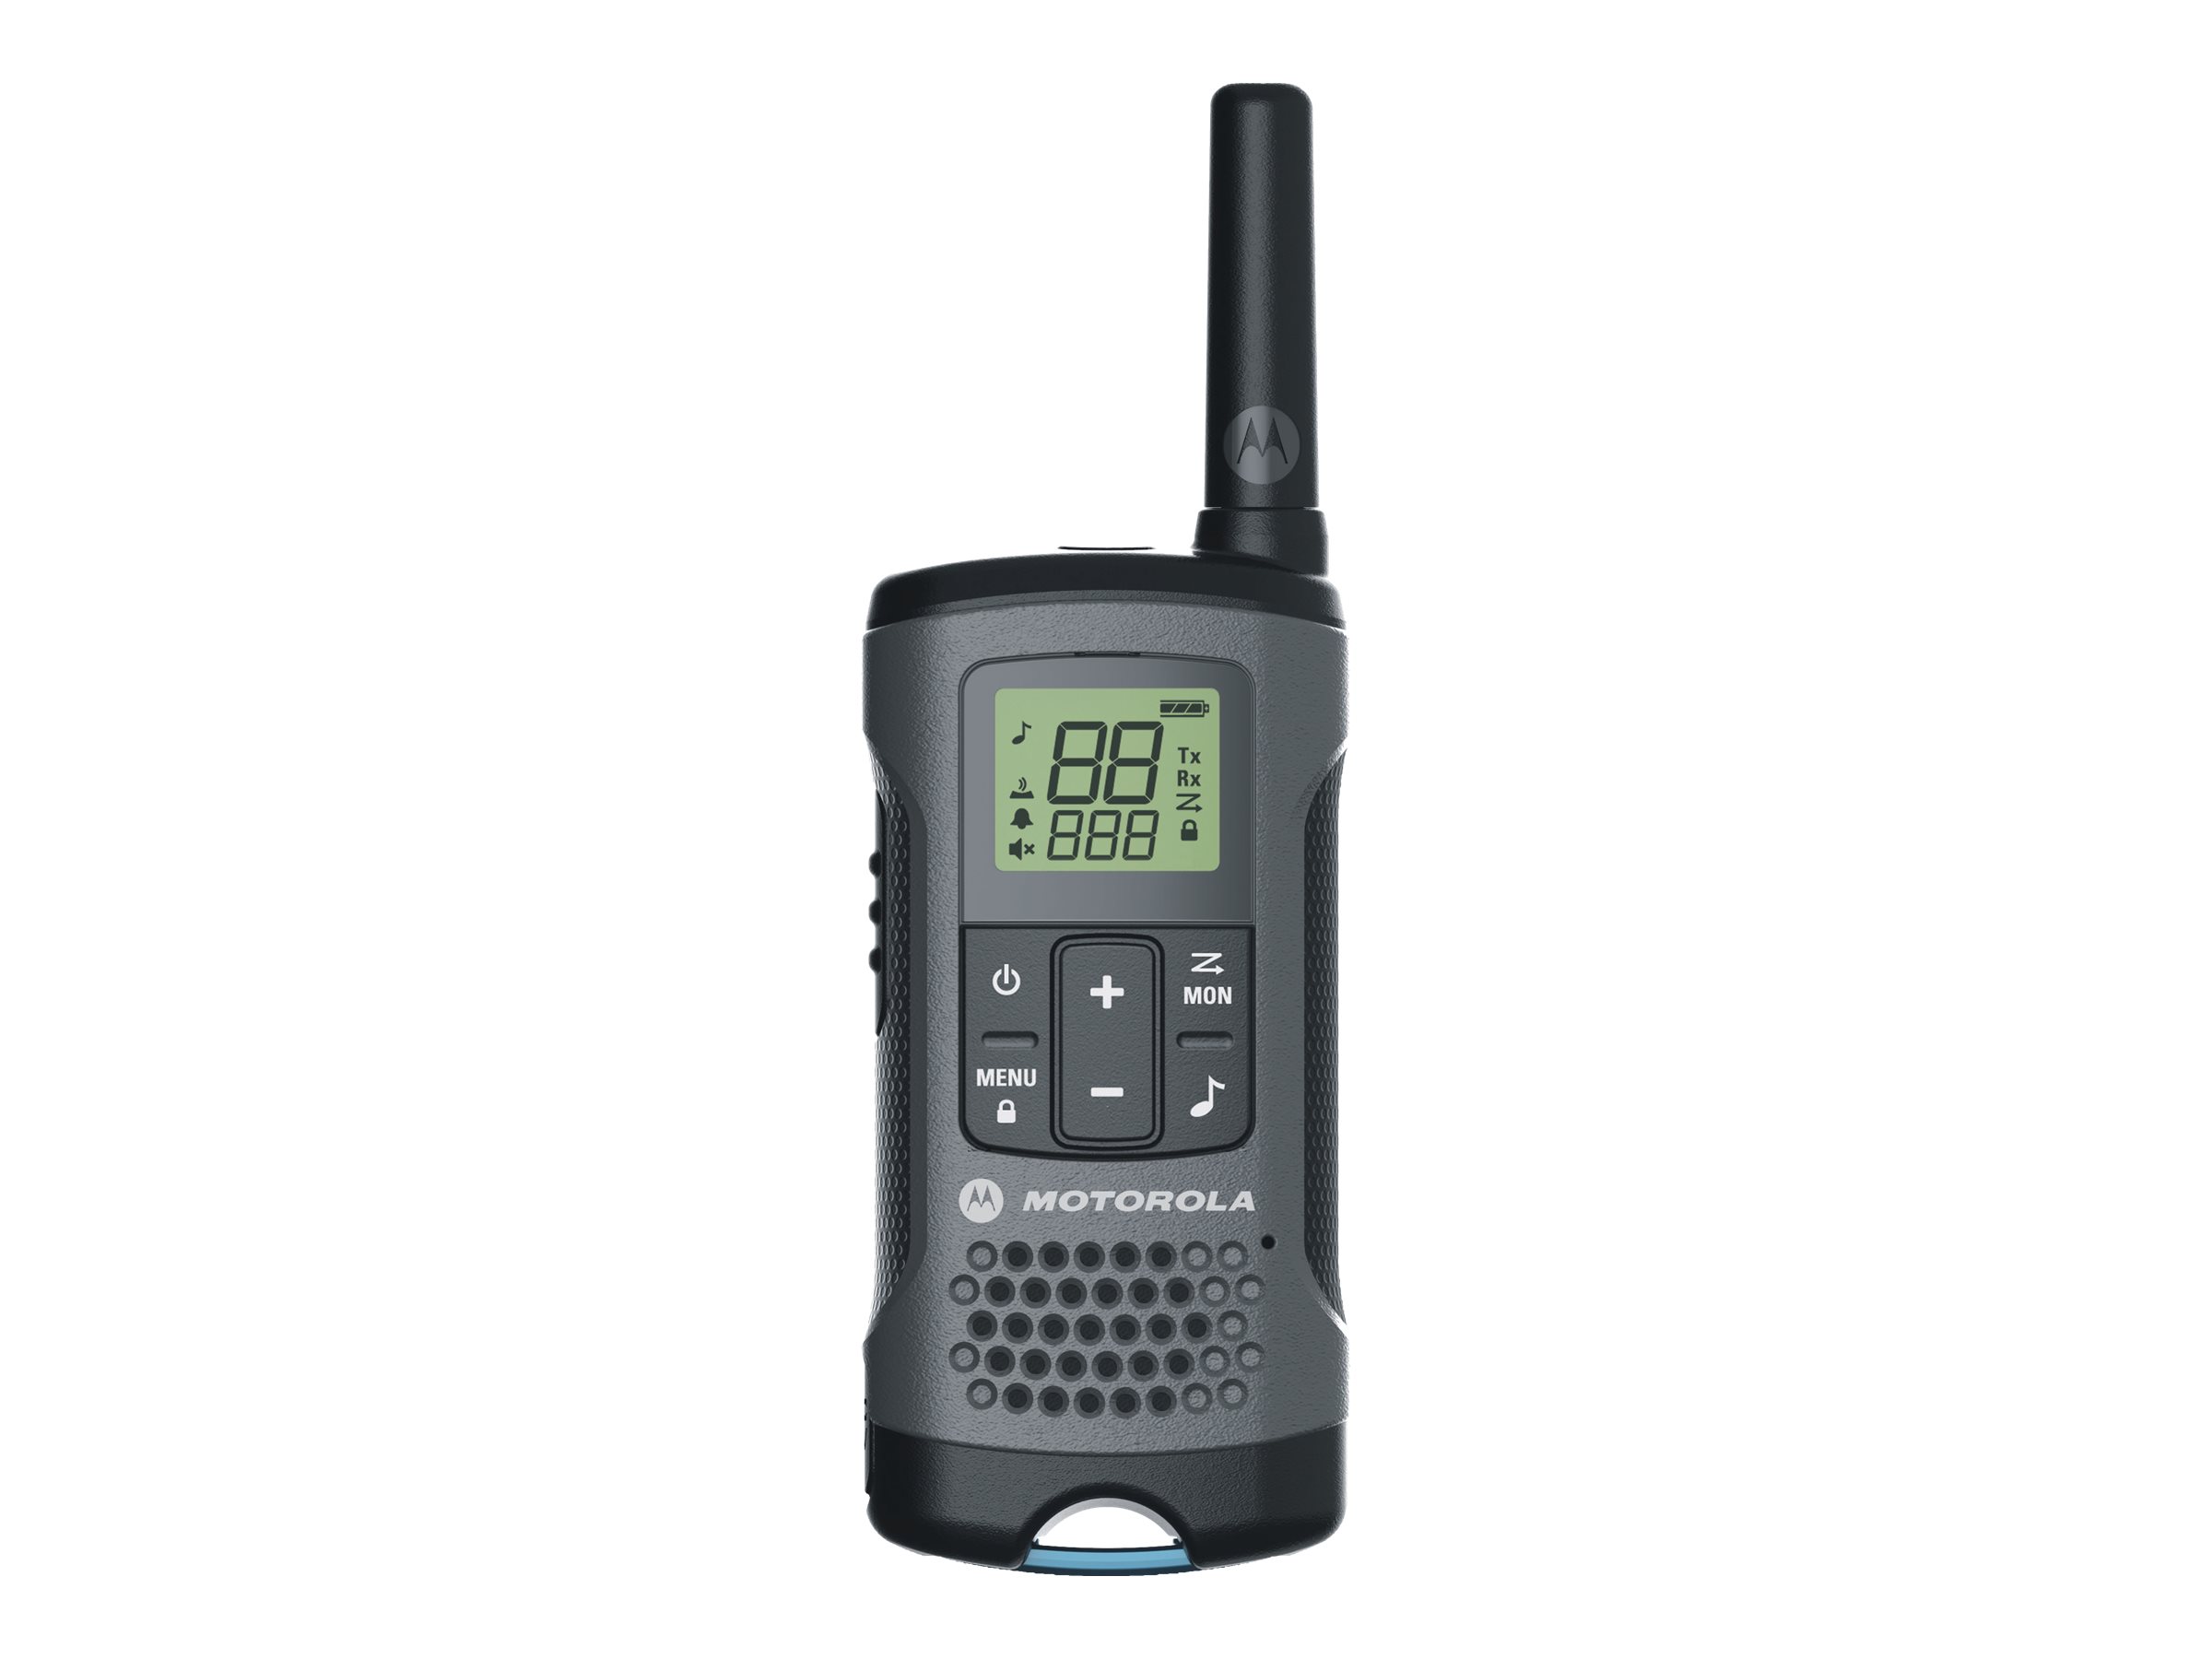 Motorola Talkabout T200 Portable two-way radio FRS/GMRS 462 467  MHz 22-channel dark gray (pack of 2) Walmart Canada